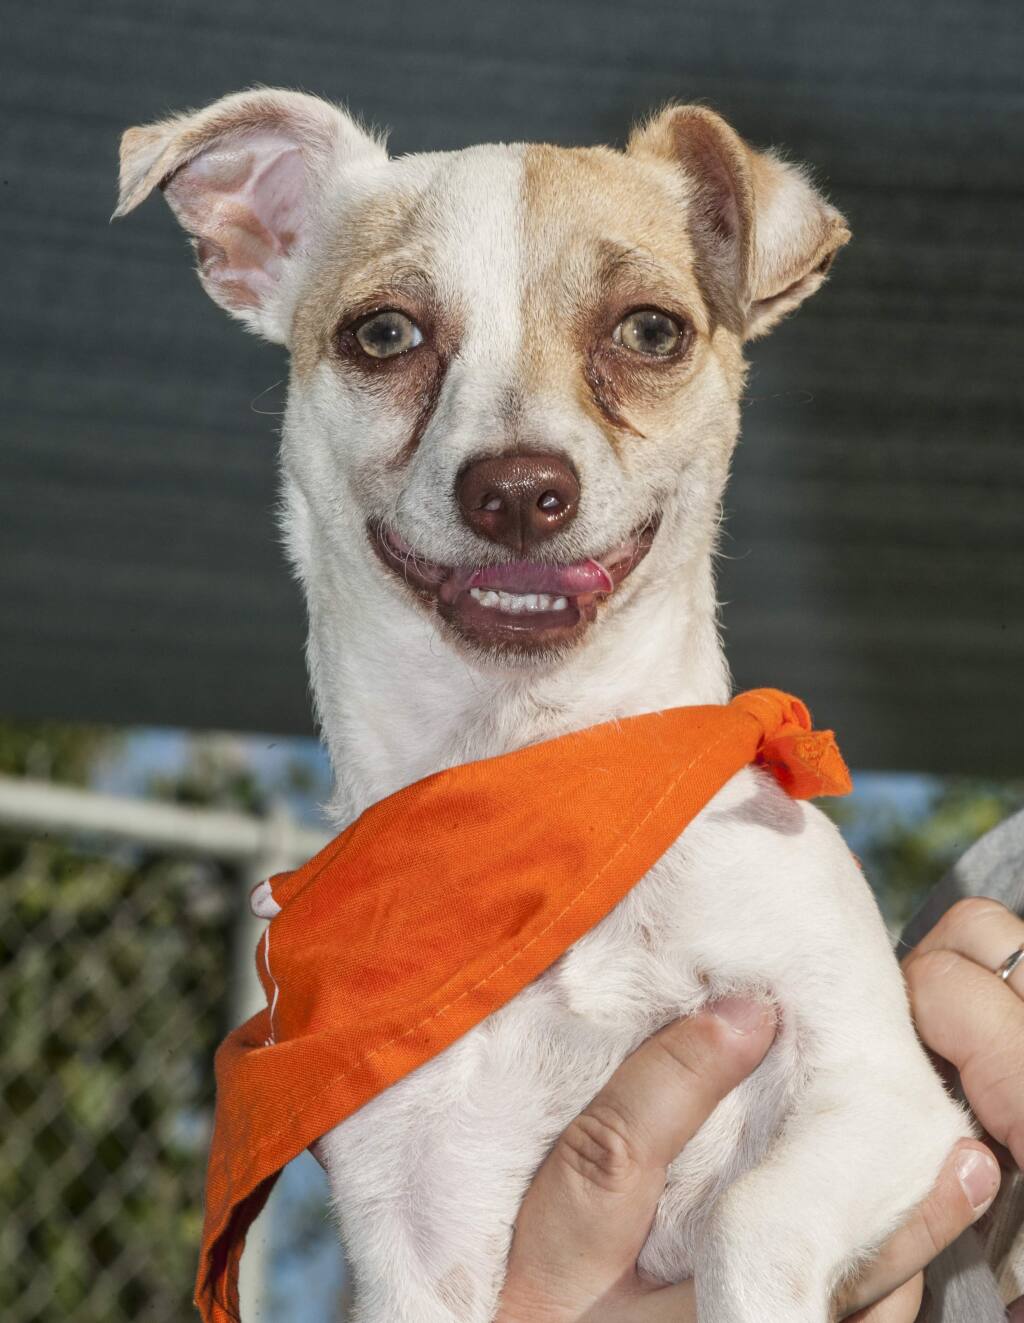 Puppy found high on drugs in Southern California ready for adoption